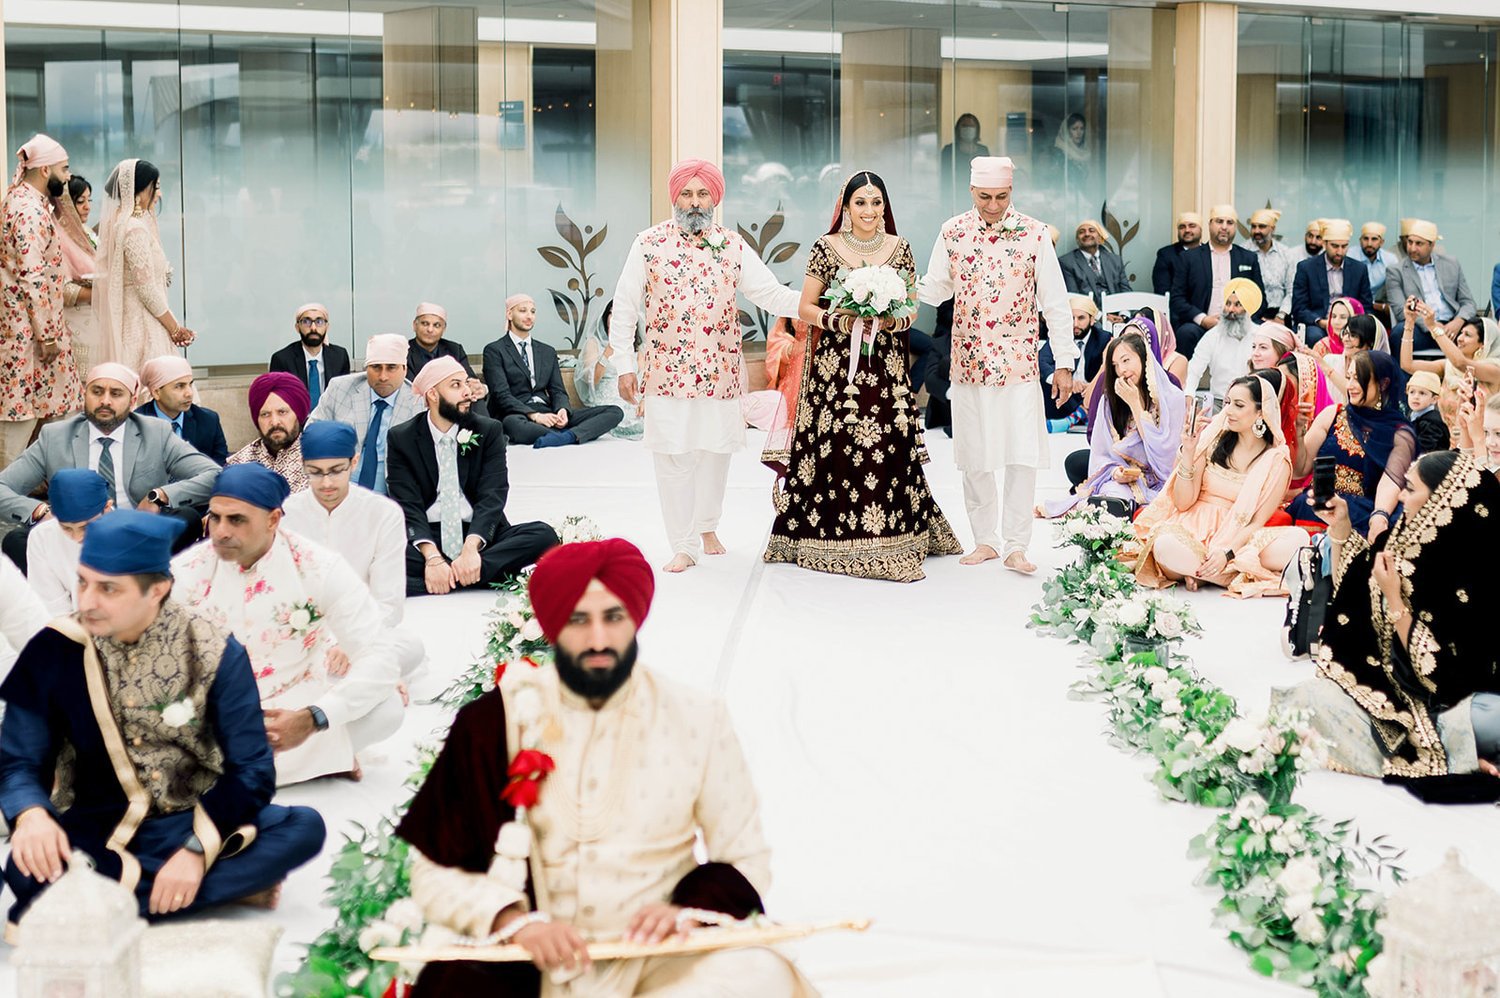 A bride in a red lehenga with gold accents is walked down the aisle by her parents as her groom awaits her